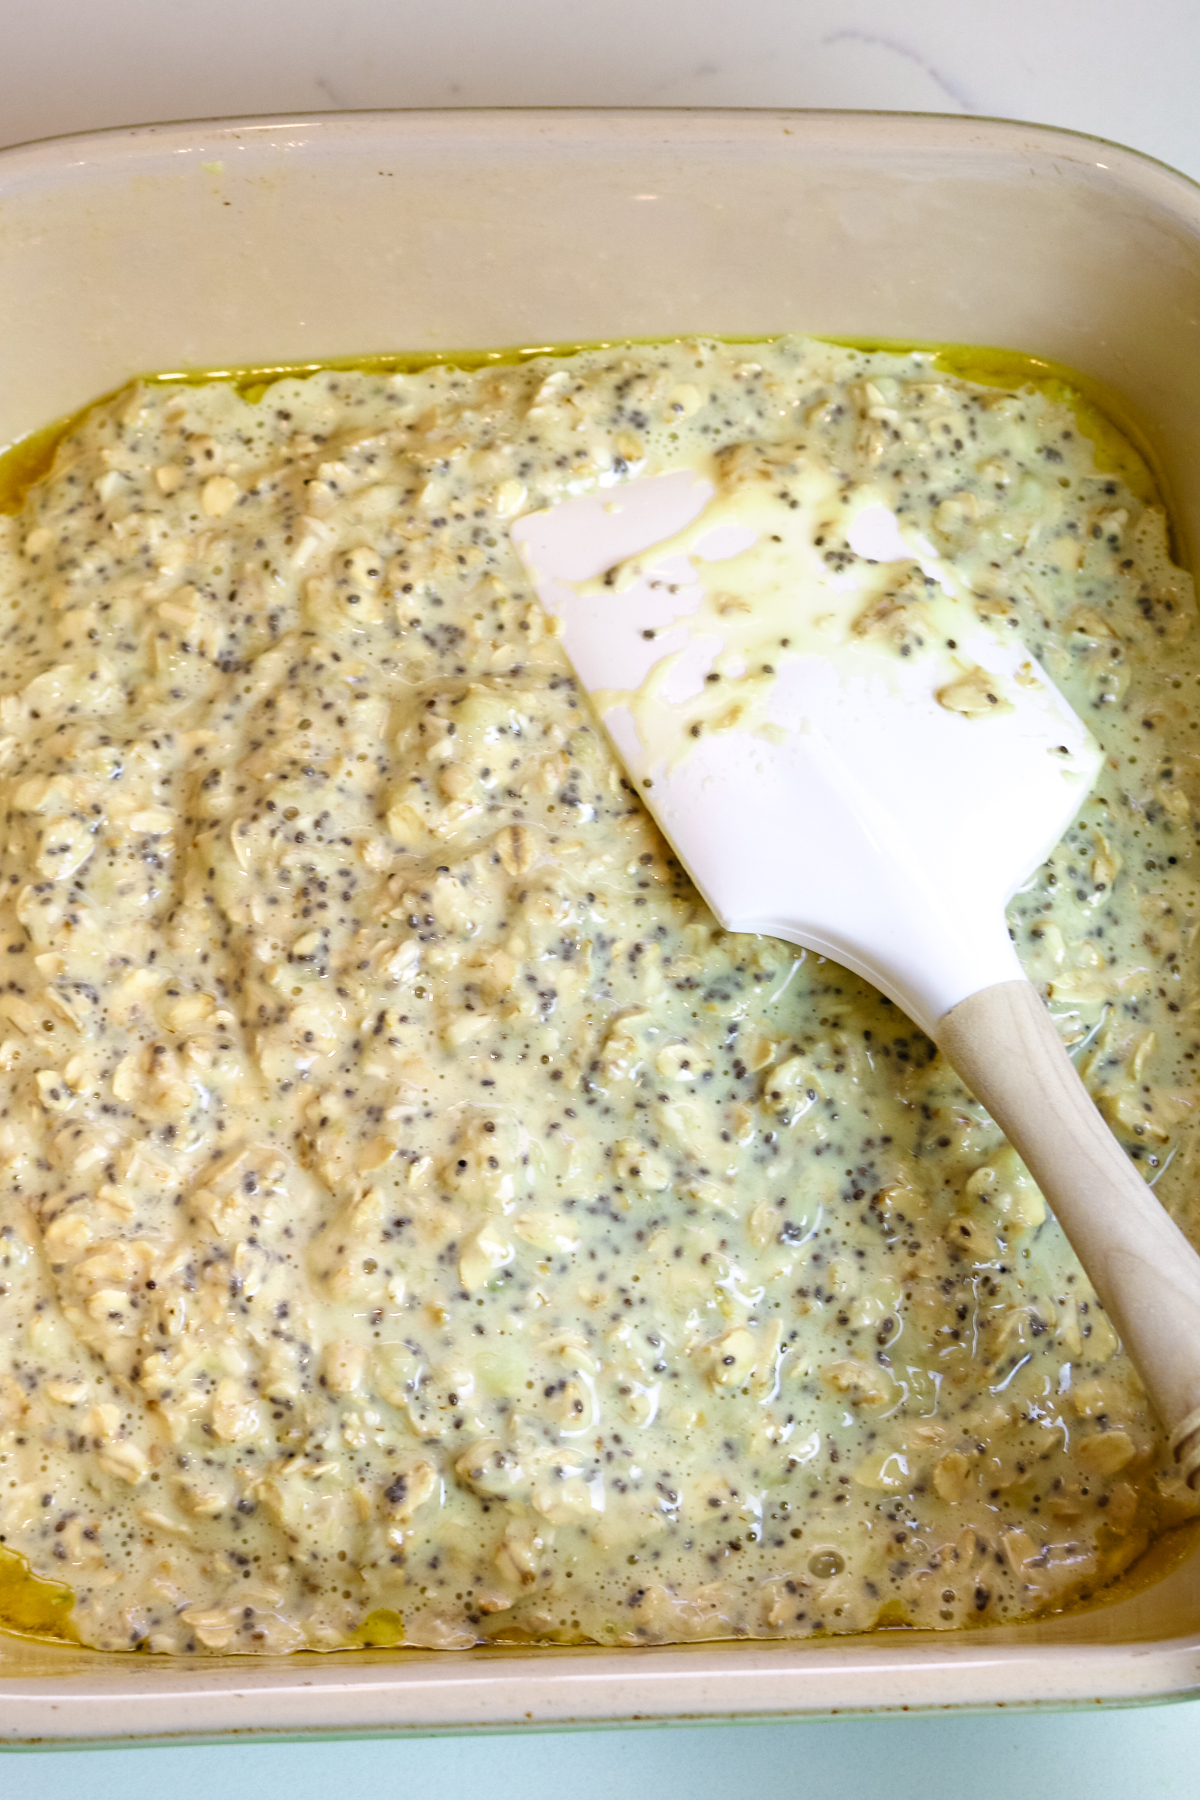 batter with oats, chia seeds, and bananas spread out in a baking dish with a spatula.